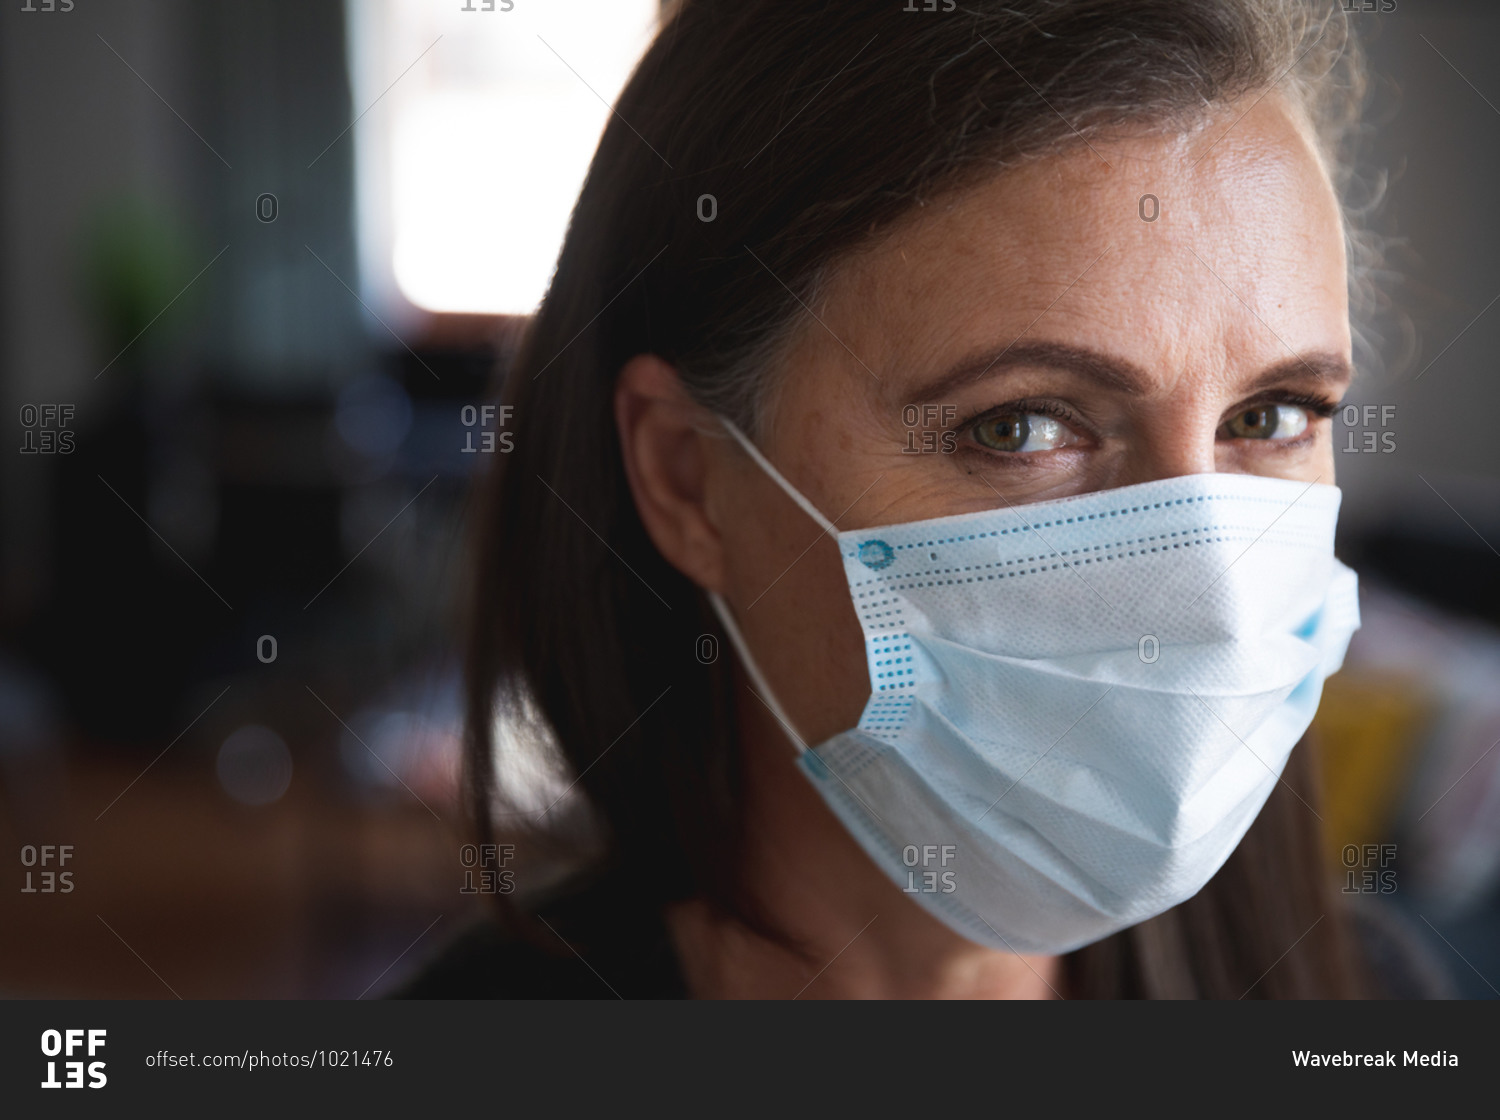 Portrait of Caucasian woman enjoying time at home, social distancing and self isolation in quarantine lockdown, wearing face mask protecting from Covid 19 coronavirus infection, looking at camera.